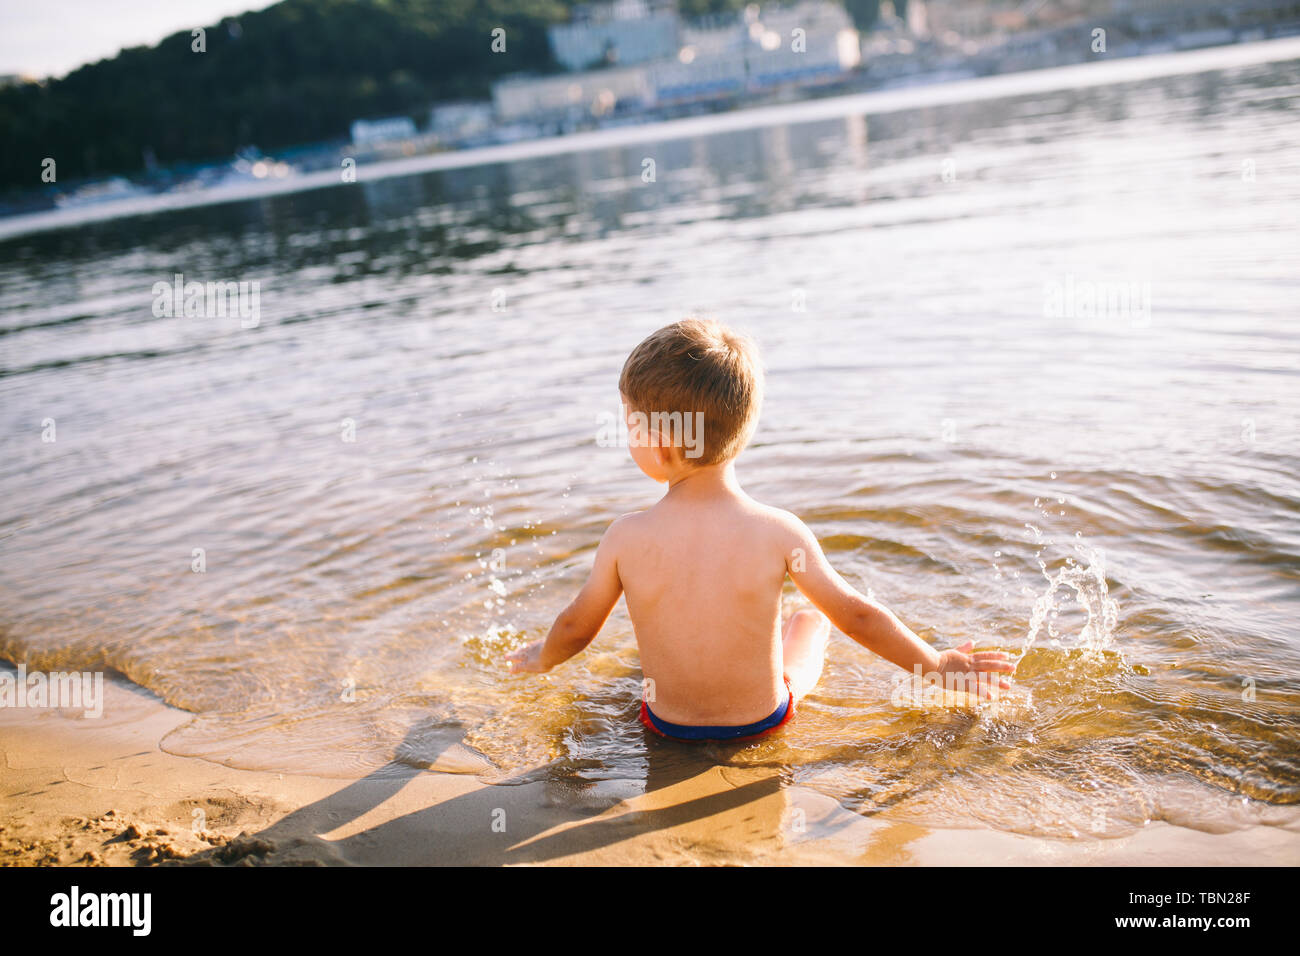 Theme is summer time and rest near the water. Little joyful Caucasian funny boy plays and enjoys in the river. The child is resting and swimming in Stock Photo